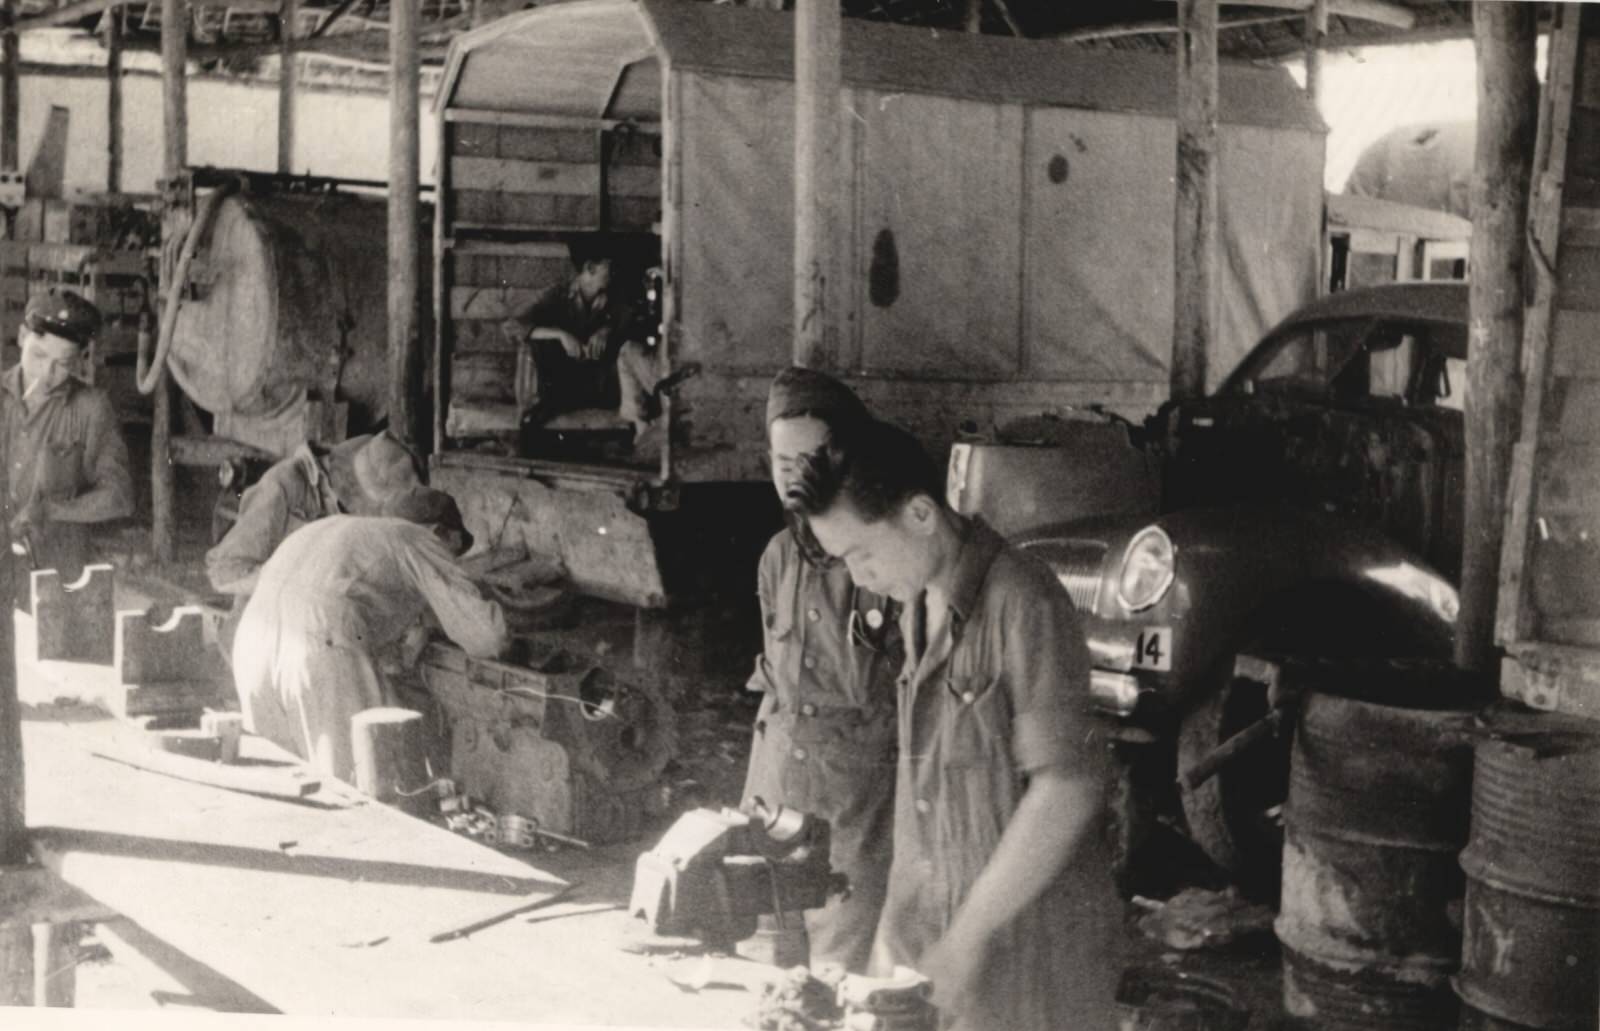 Repair shop of the Red Cross Medical Corps. 1937-1940